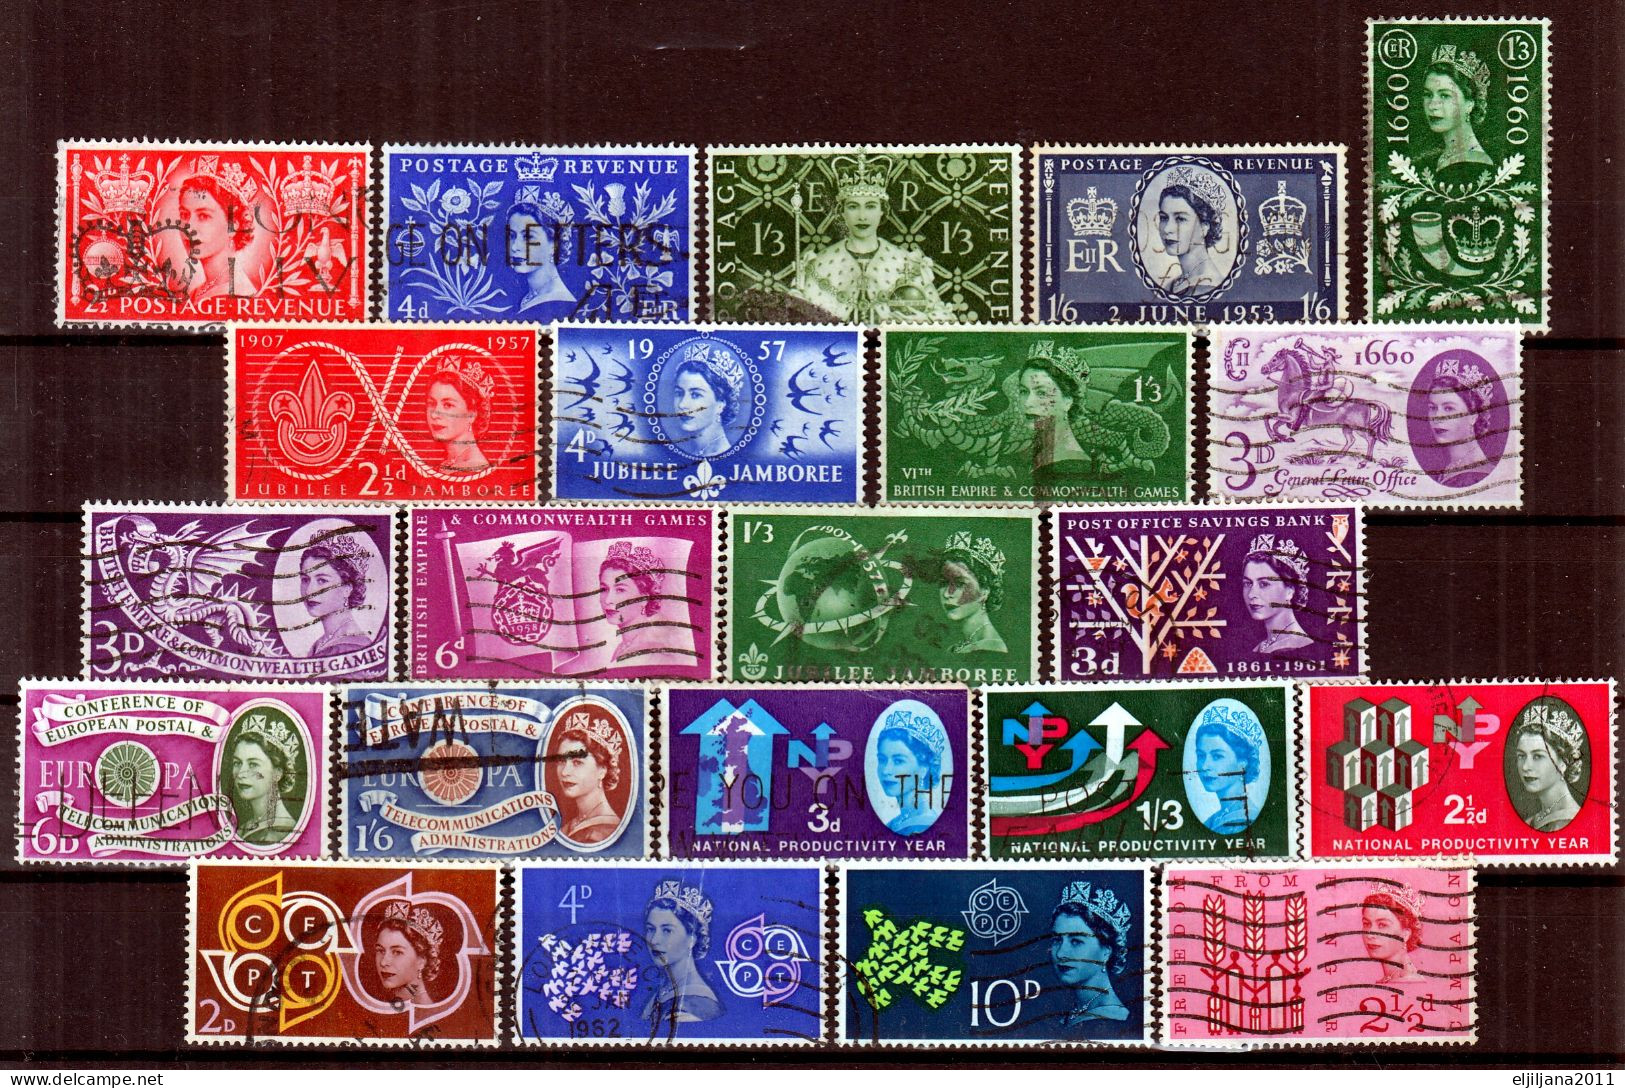 Great Britain - GB / UK / QEII. 1953 - 1963 ⁕ Queen Elizabeth II. ⁕ 22v Used Stamps / Unchecked - Used Stamps